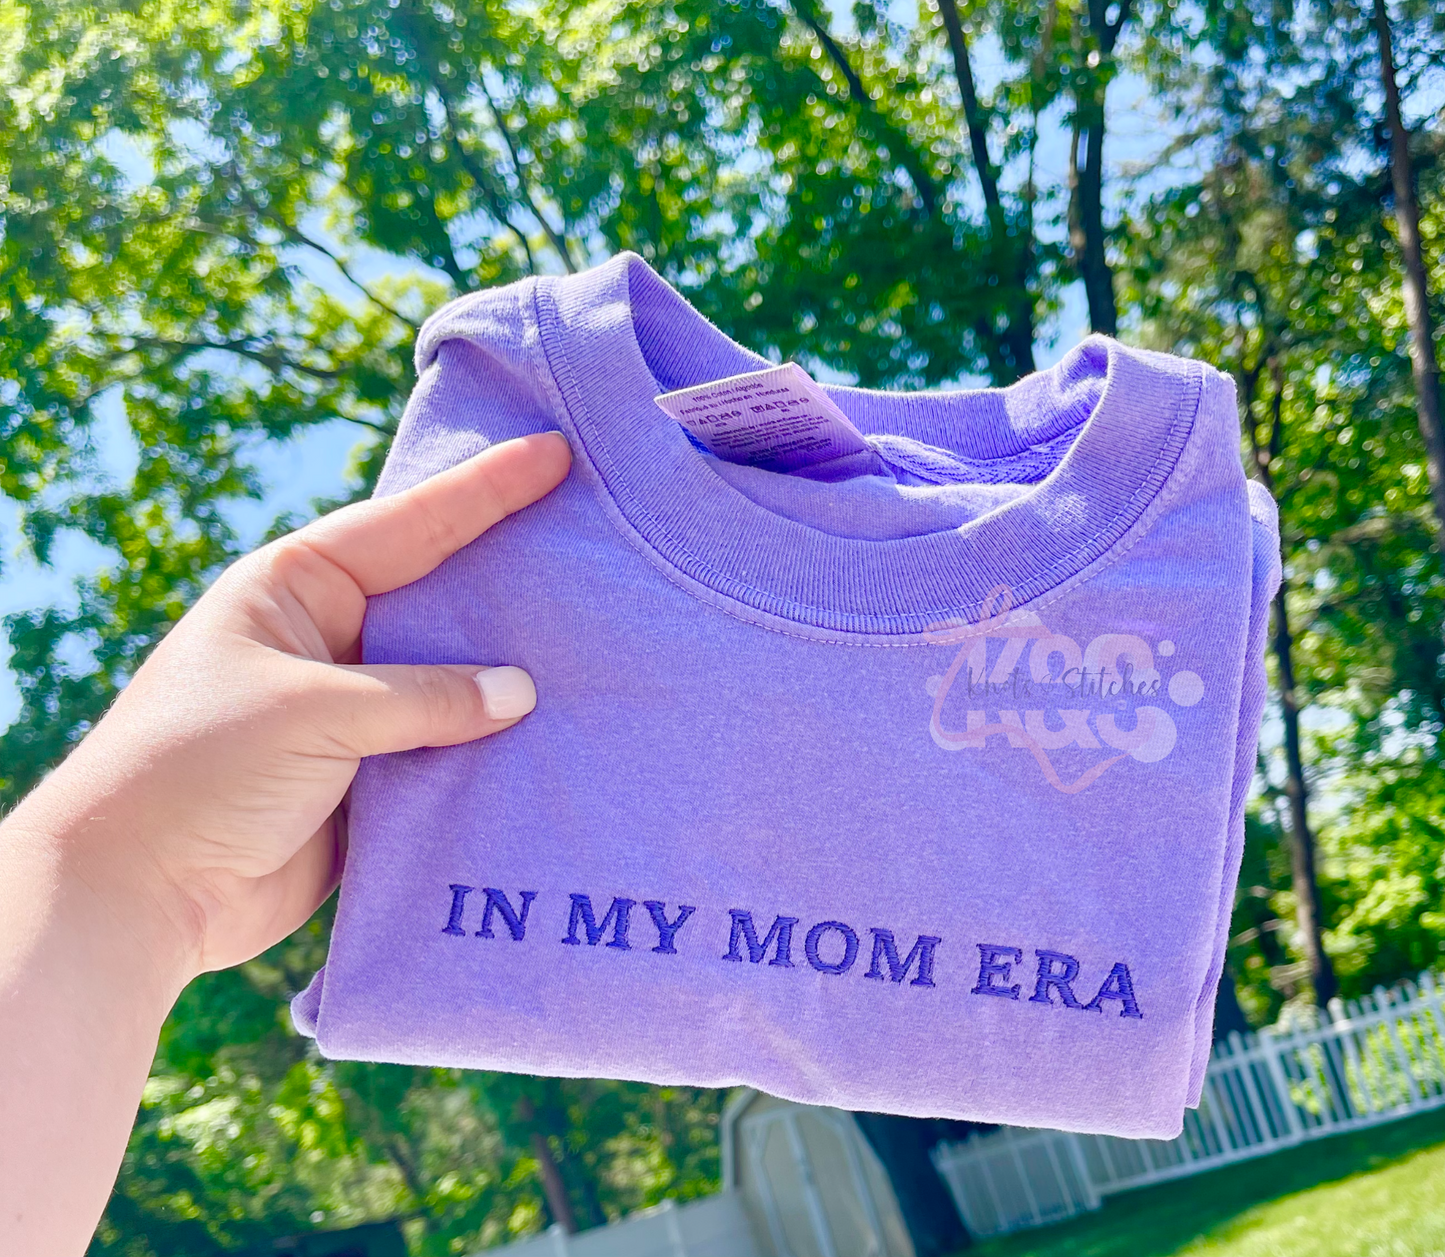 In my mom era embroidered tee